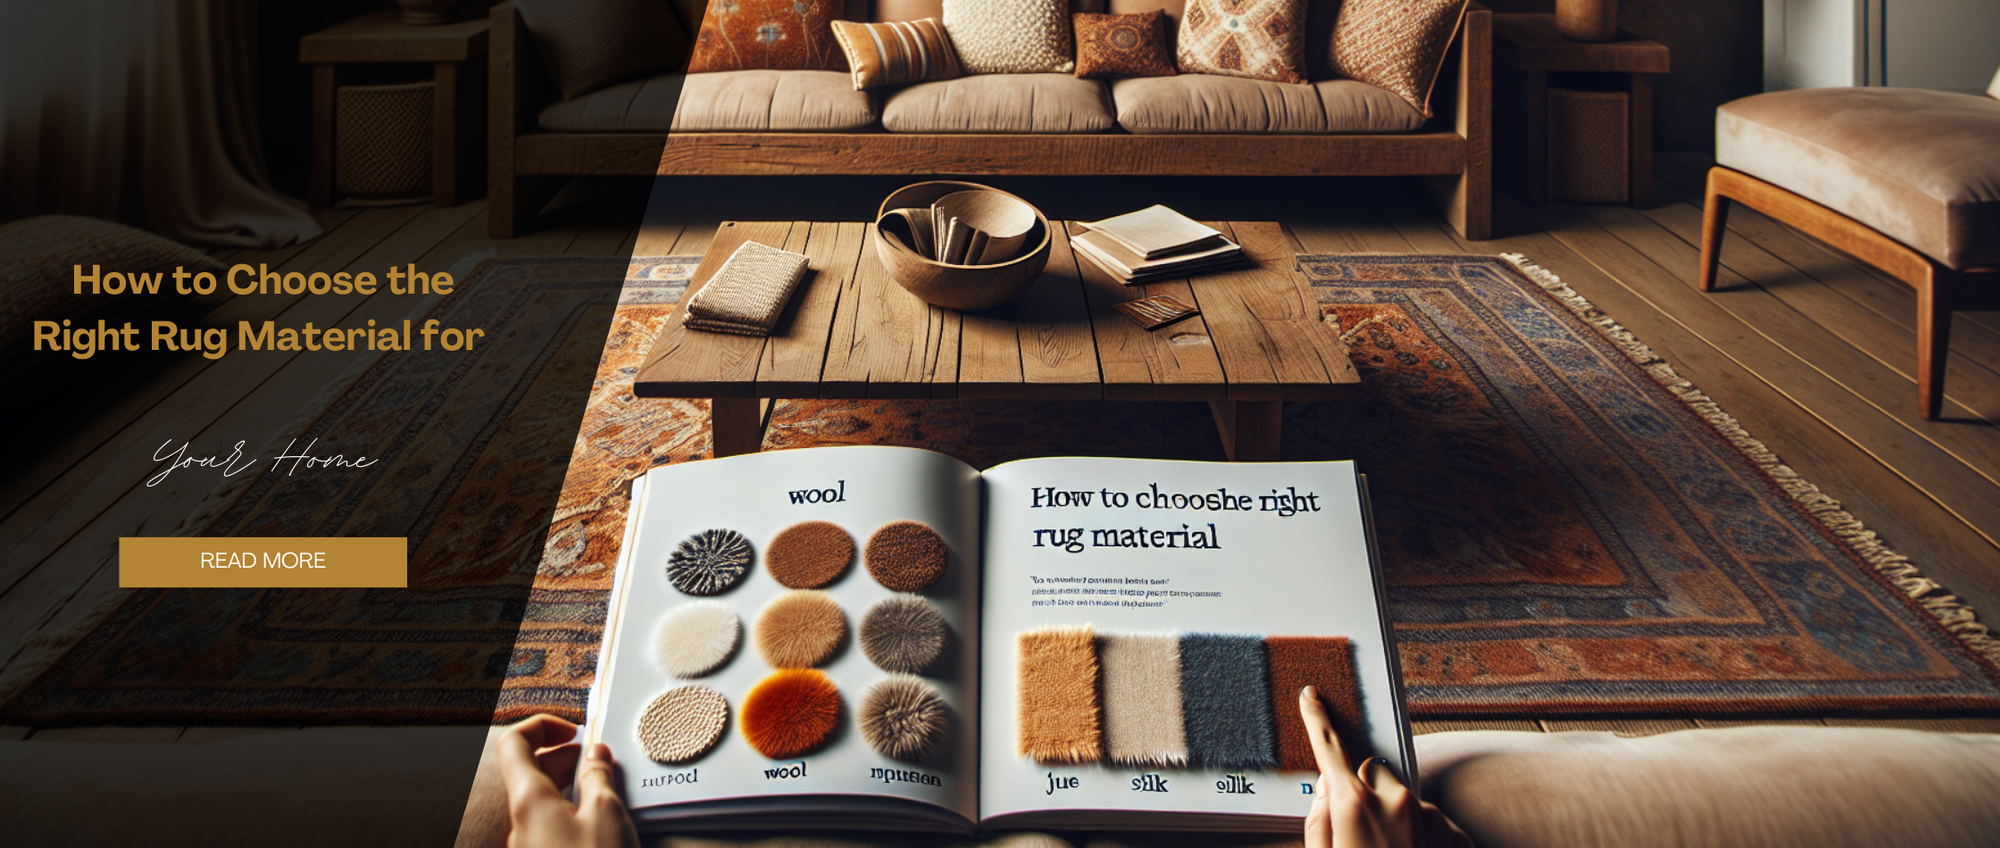 How to Choose the Right Rug Material for Your Home